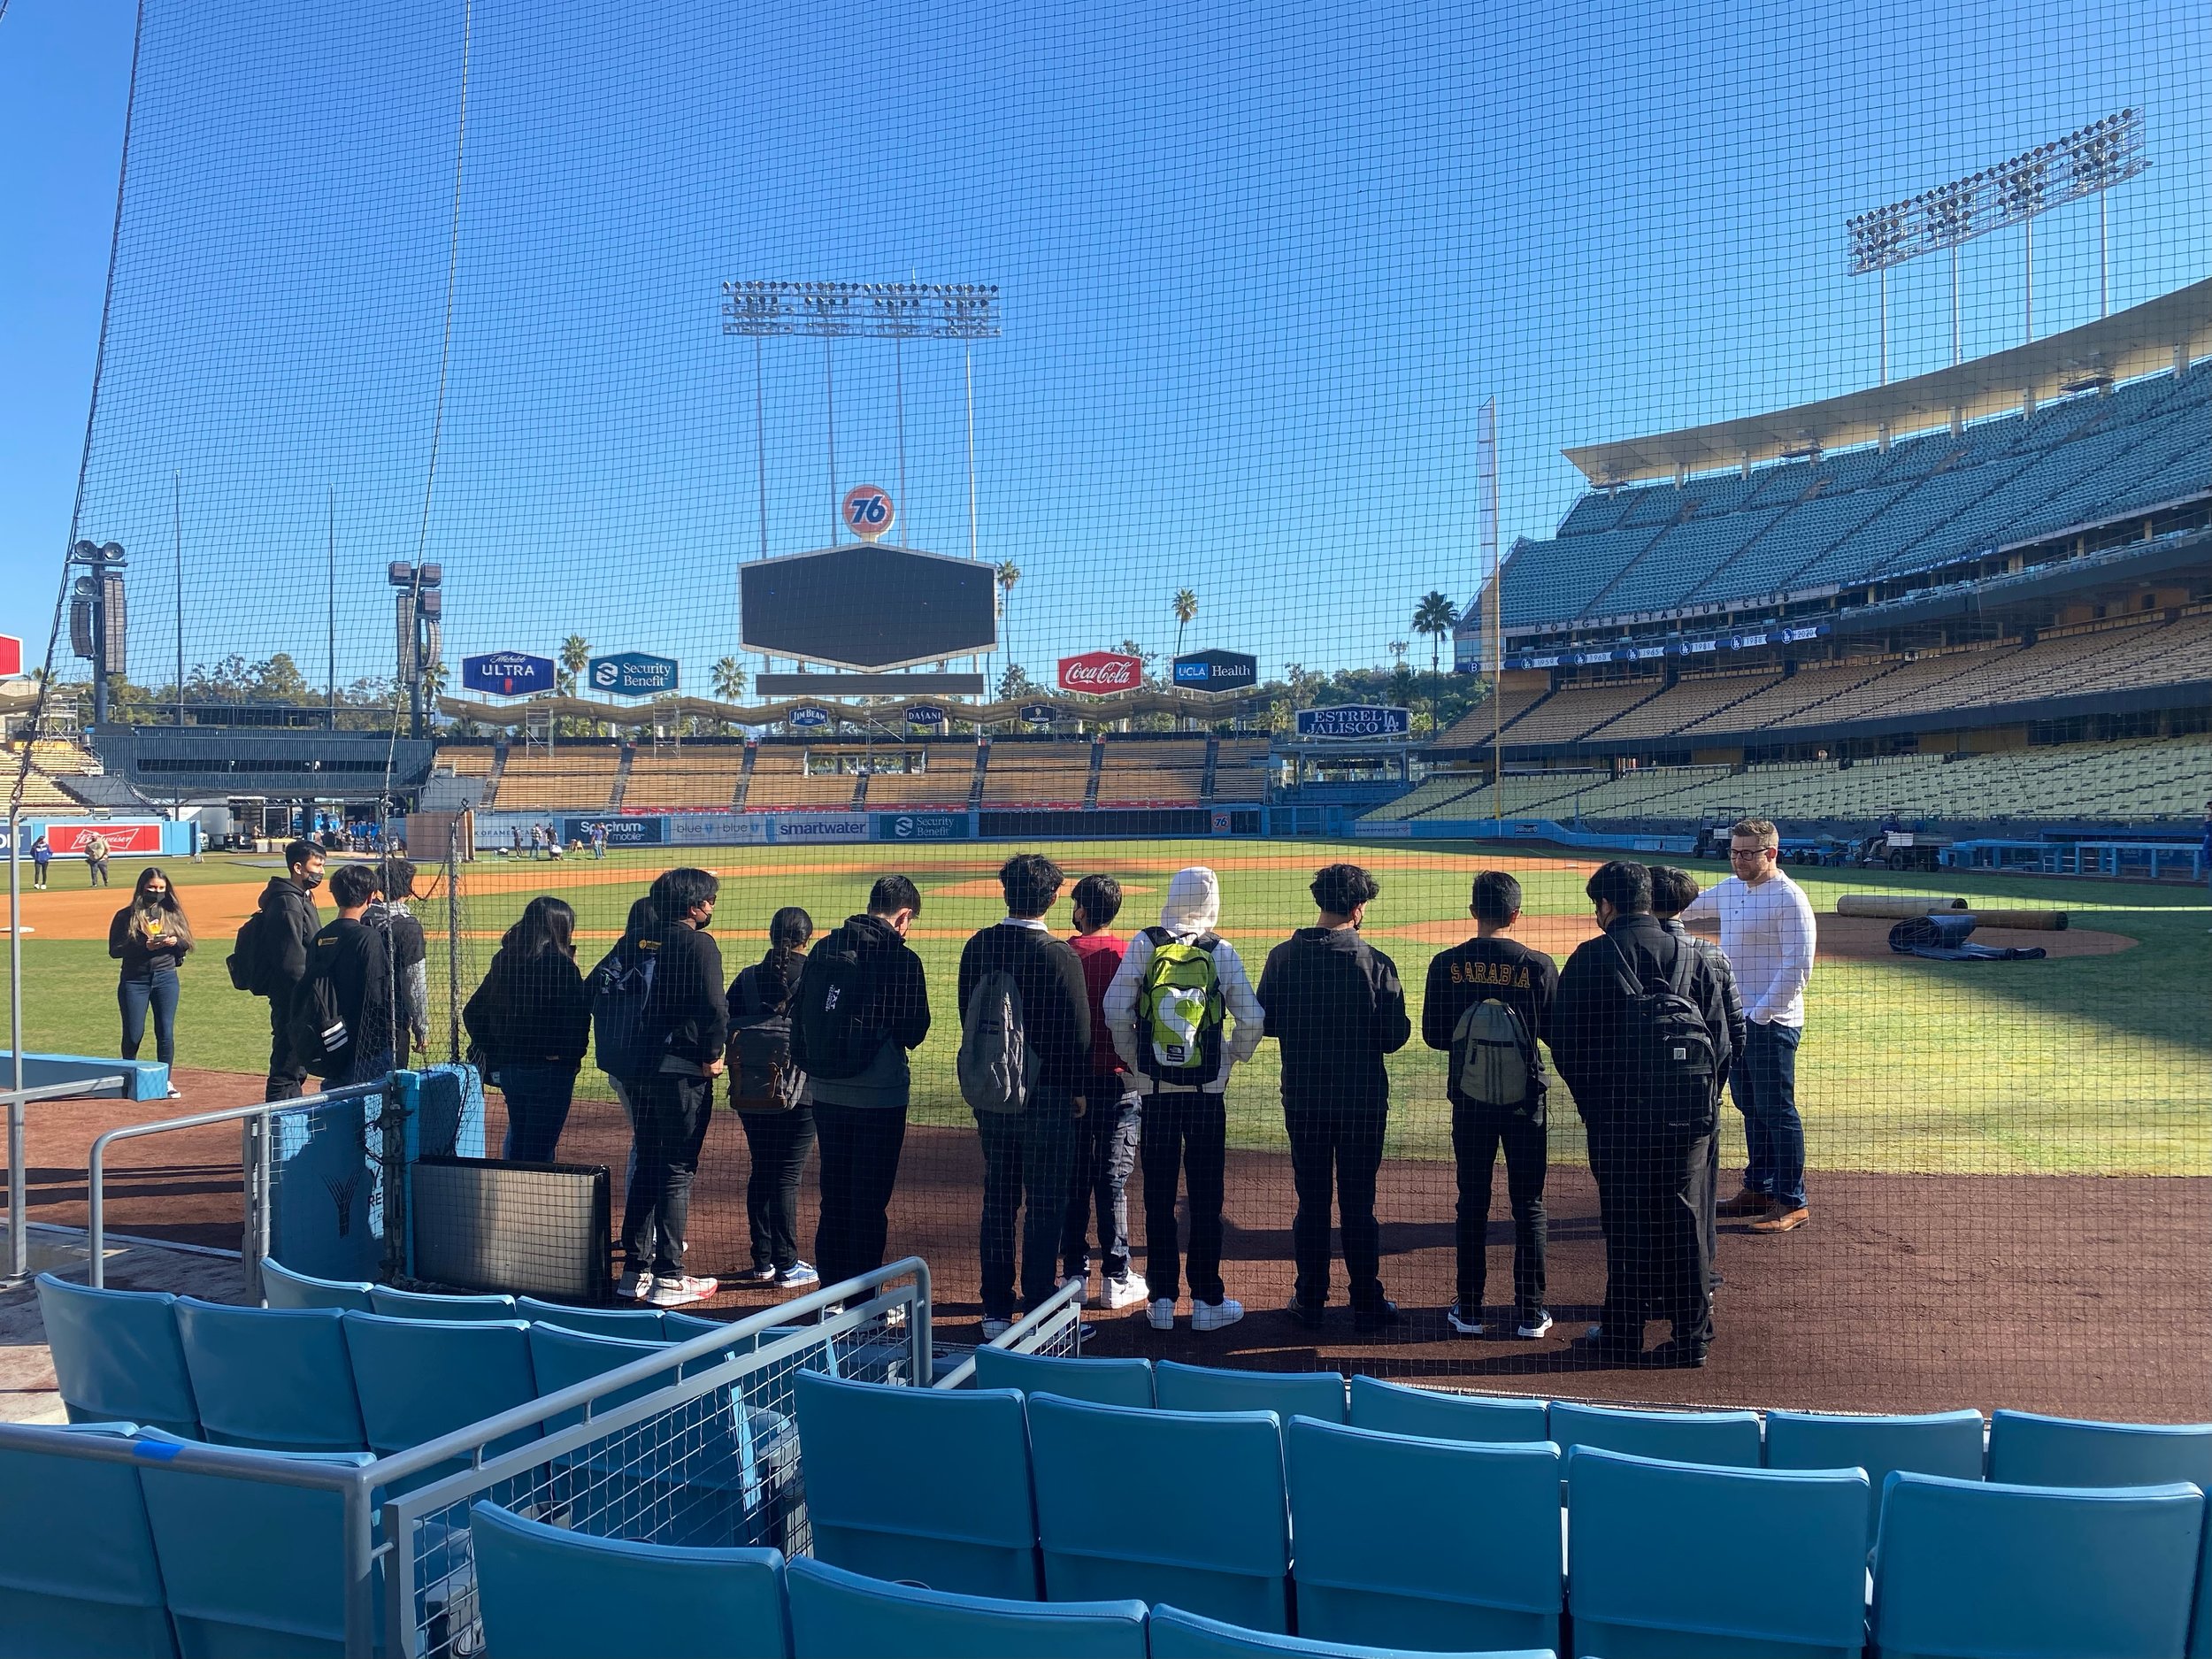 Students on the field of Dodger Stadium